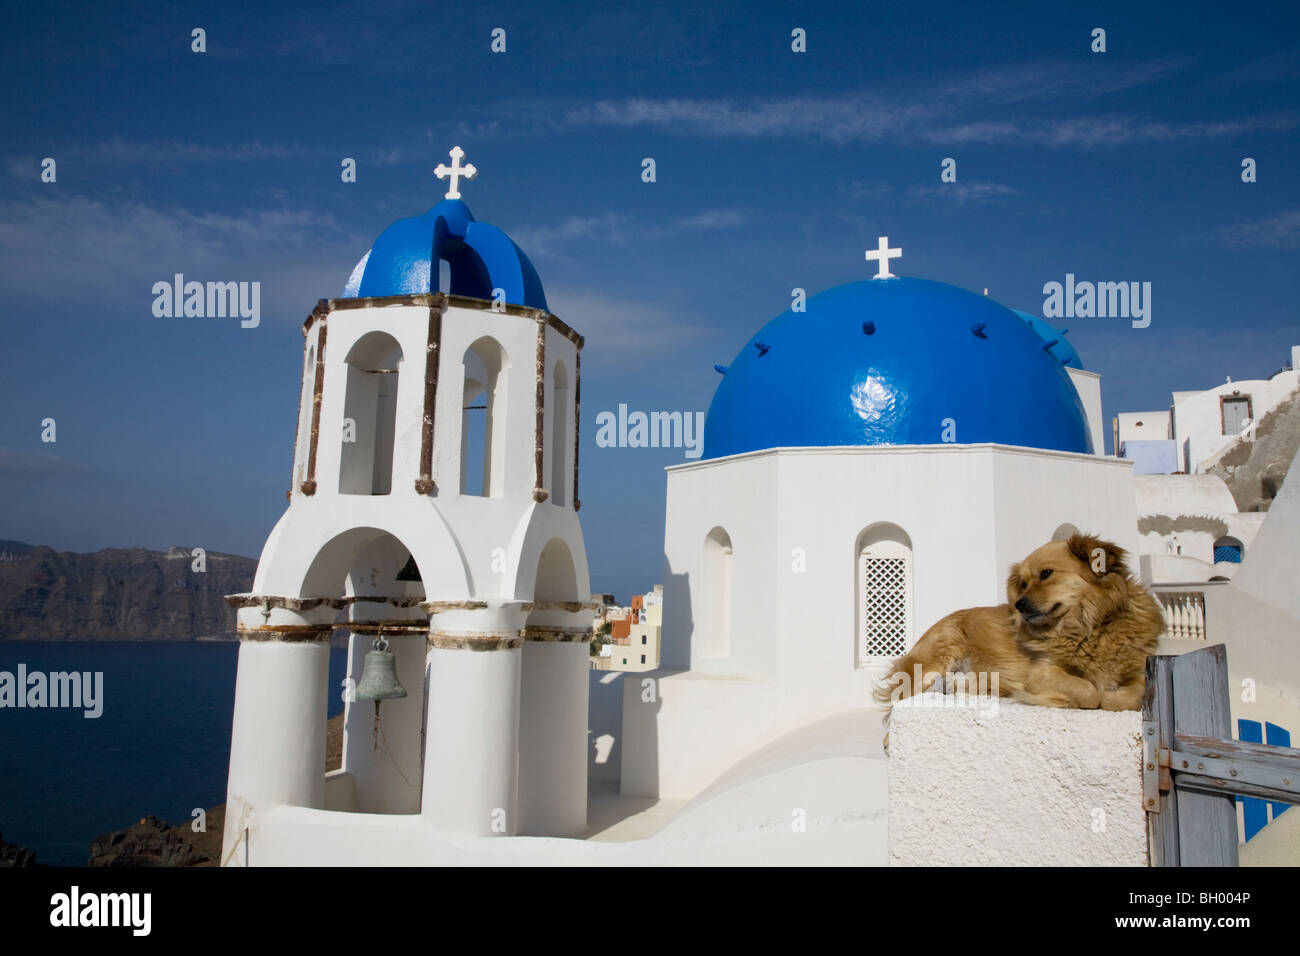 Dog relaxing on white gatepost in front of blue-domed church and bell tower Stock Photo